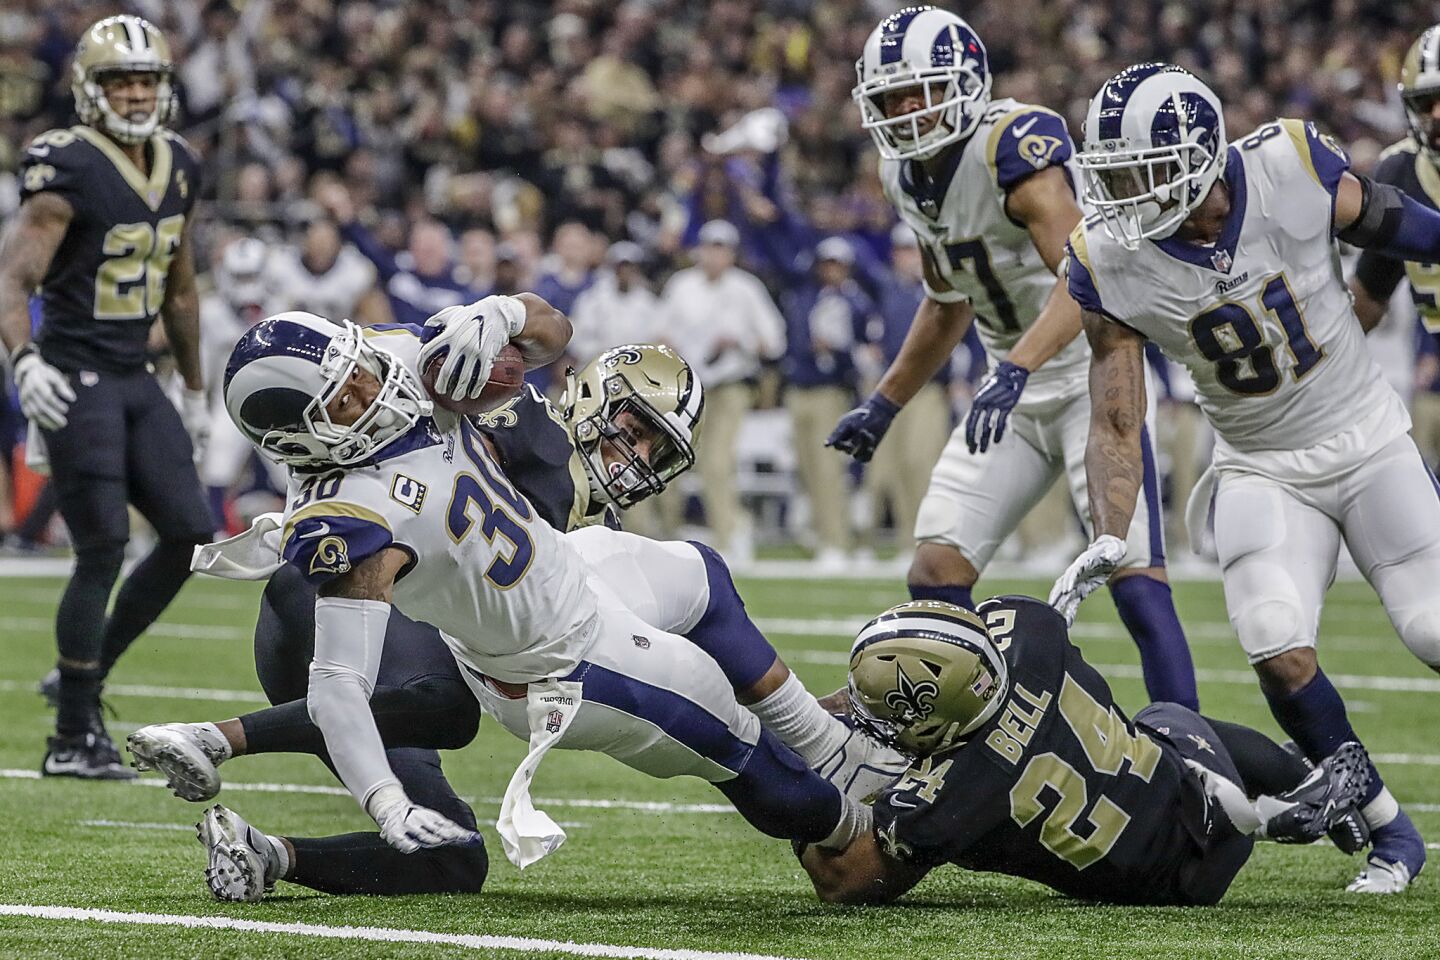 Rams running back Todd Gurley falls into the end zone for a touchdown late in the second quarter against the Saints in the NFC Championship at the Superdome on Jan. 20.